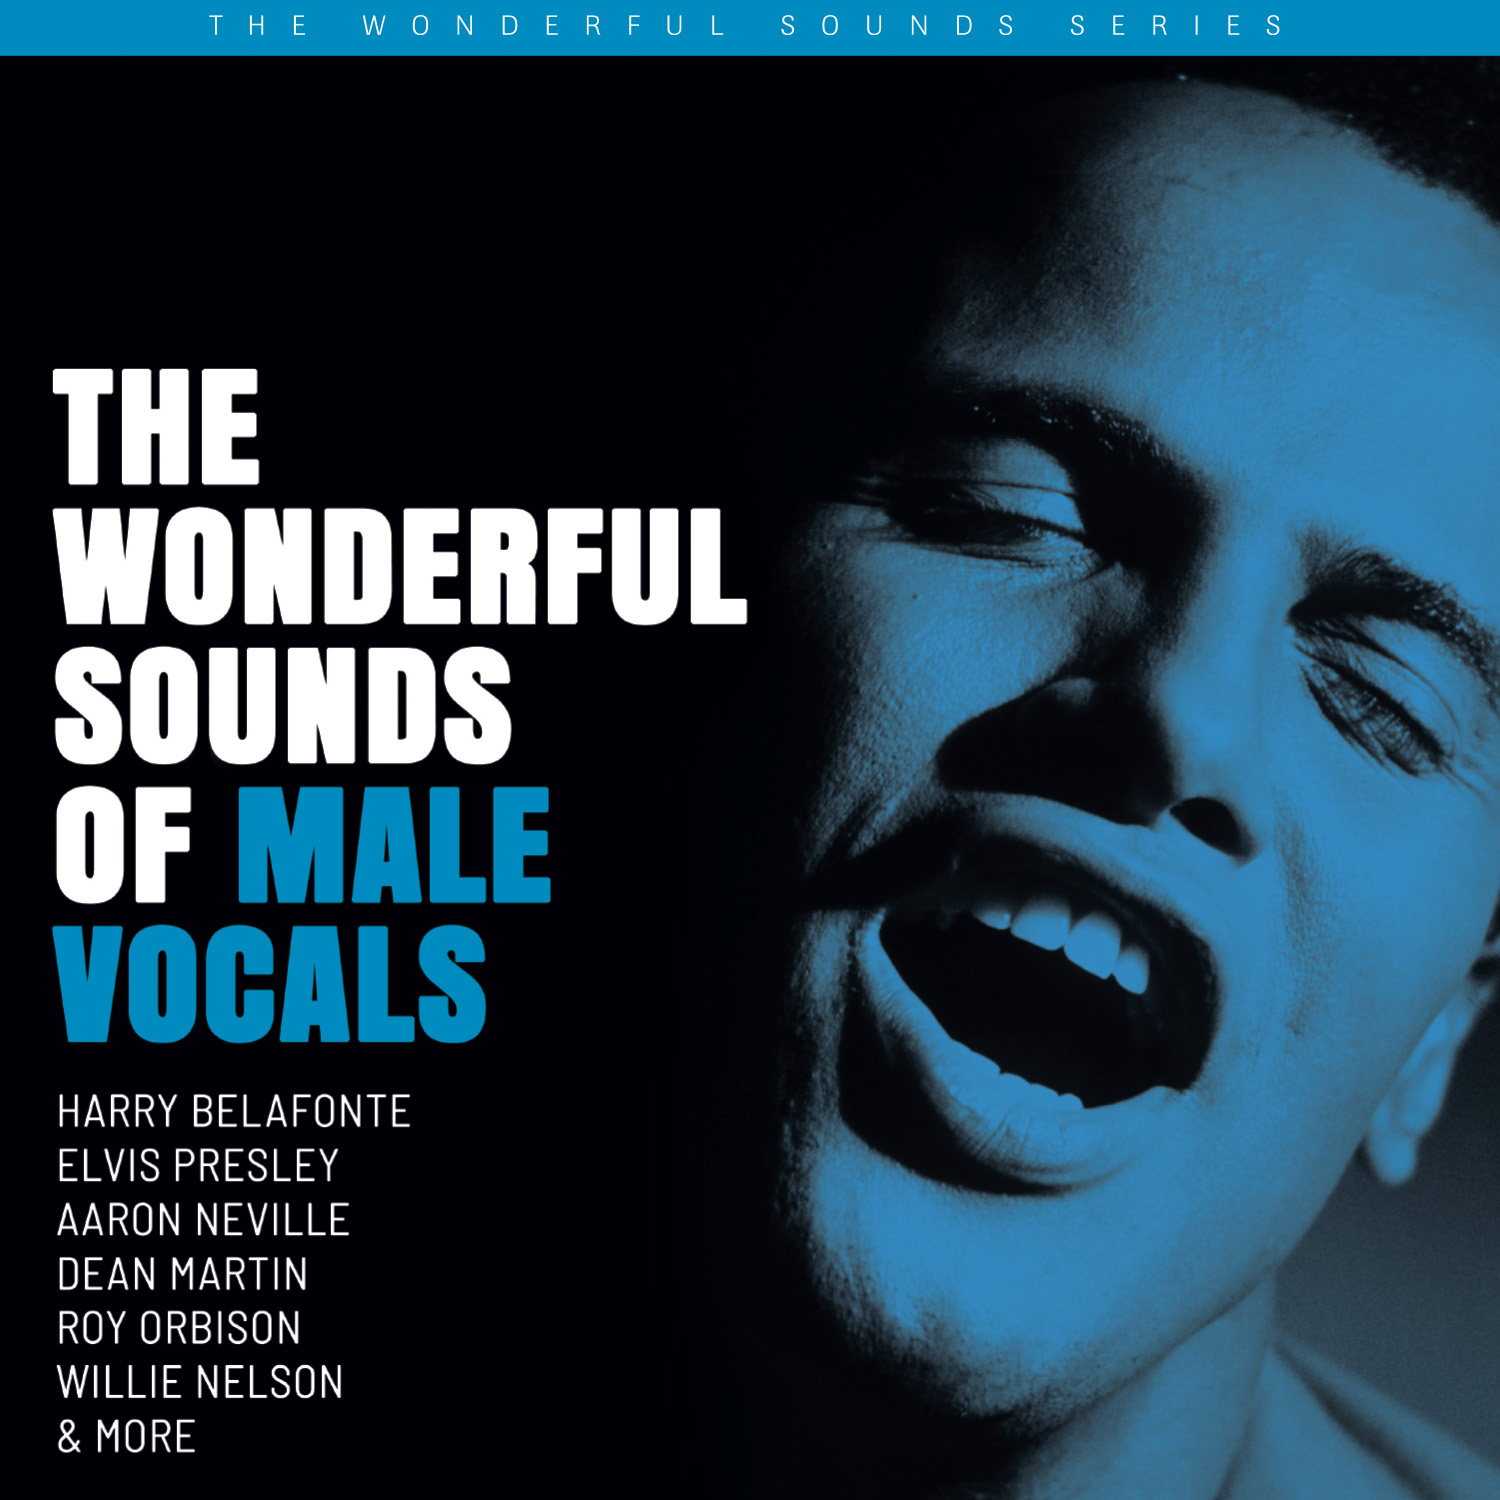 AAPP 131 Wonderful Sounds Male Vocals